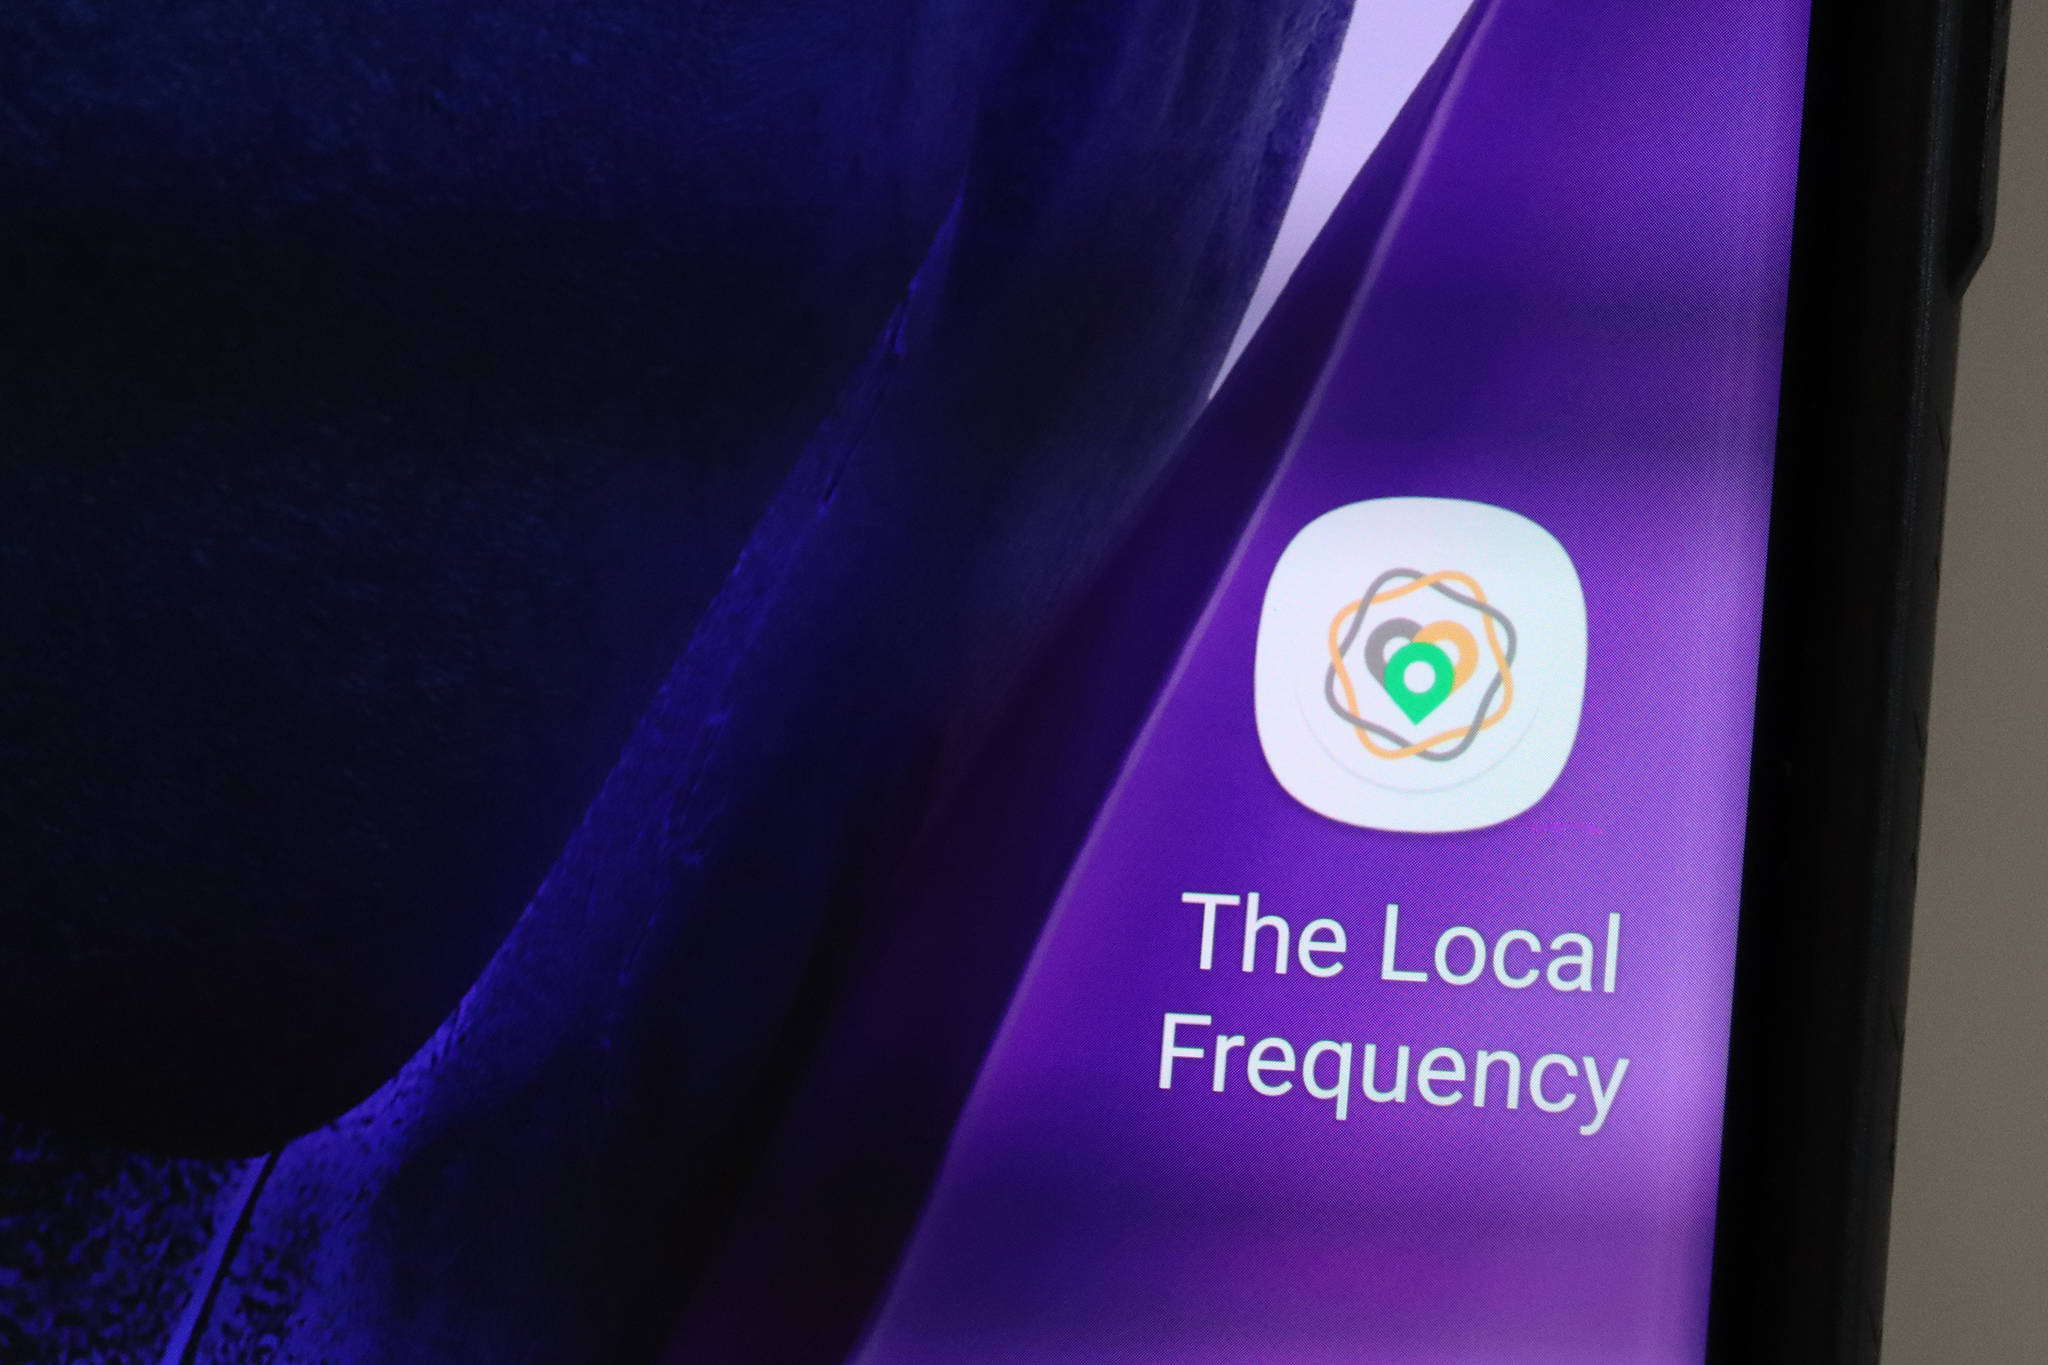 Juneau businesses now offer rewards through the Local Frequency application. The smartphone-based app aims to give locally-owned businesses loyalty, rebate, and promotion opportunities with a community-based twist. (Ben Hohenstatt / Juneau Empire)